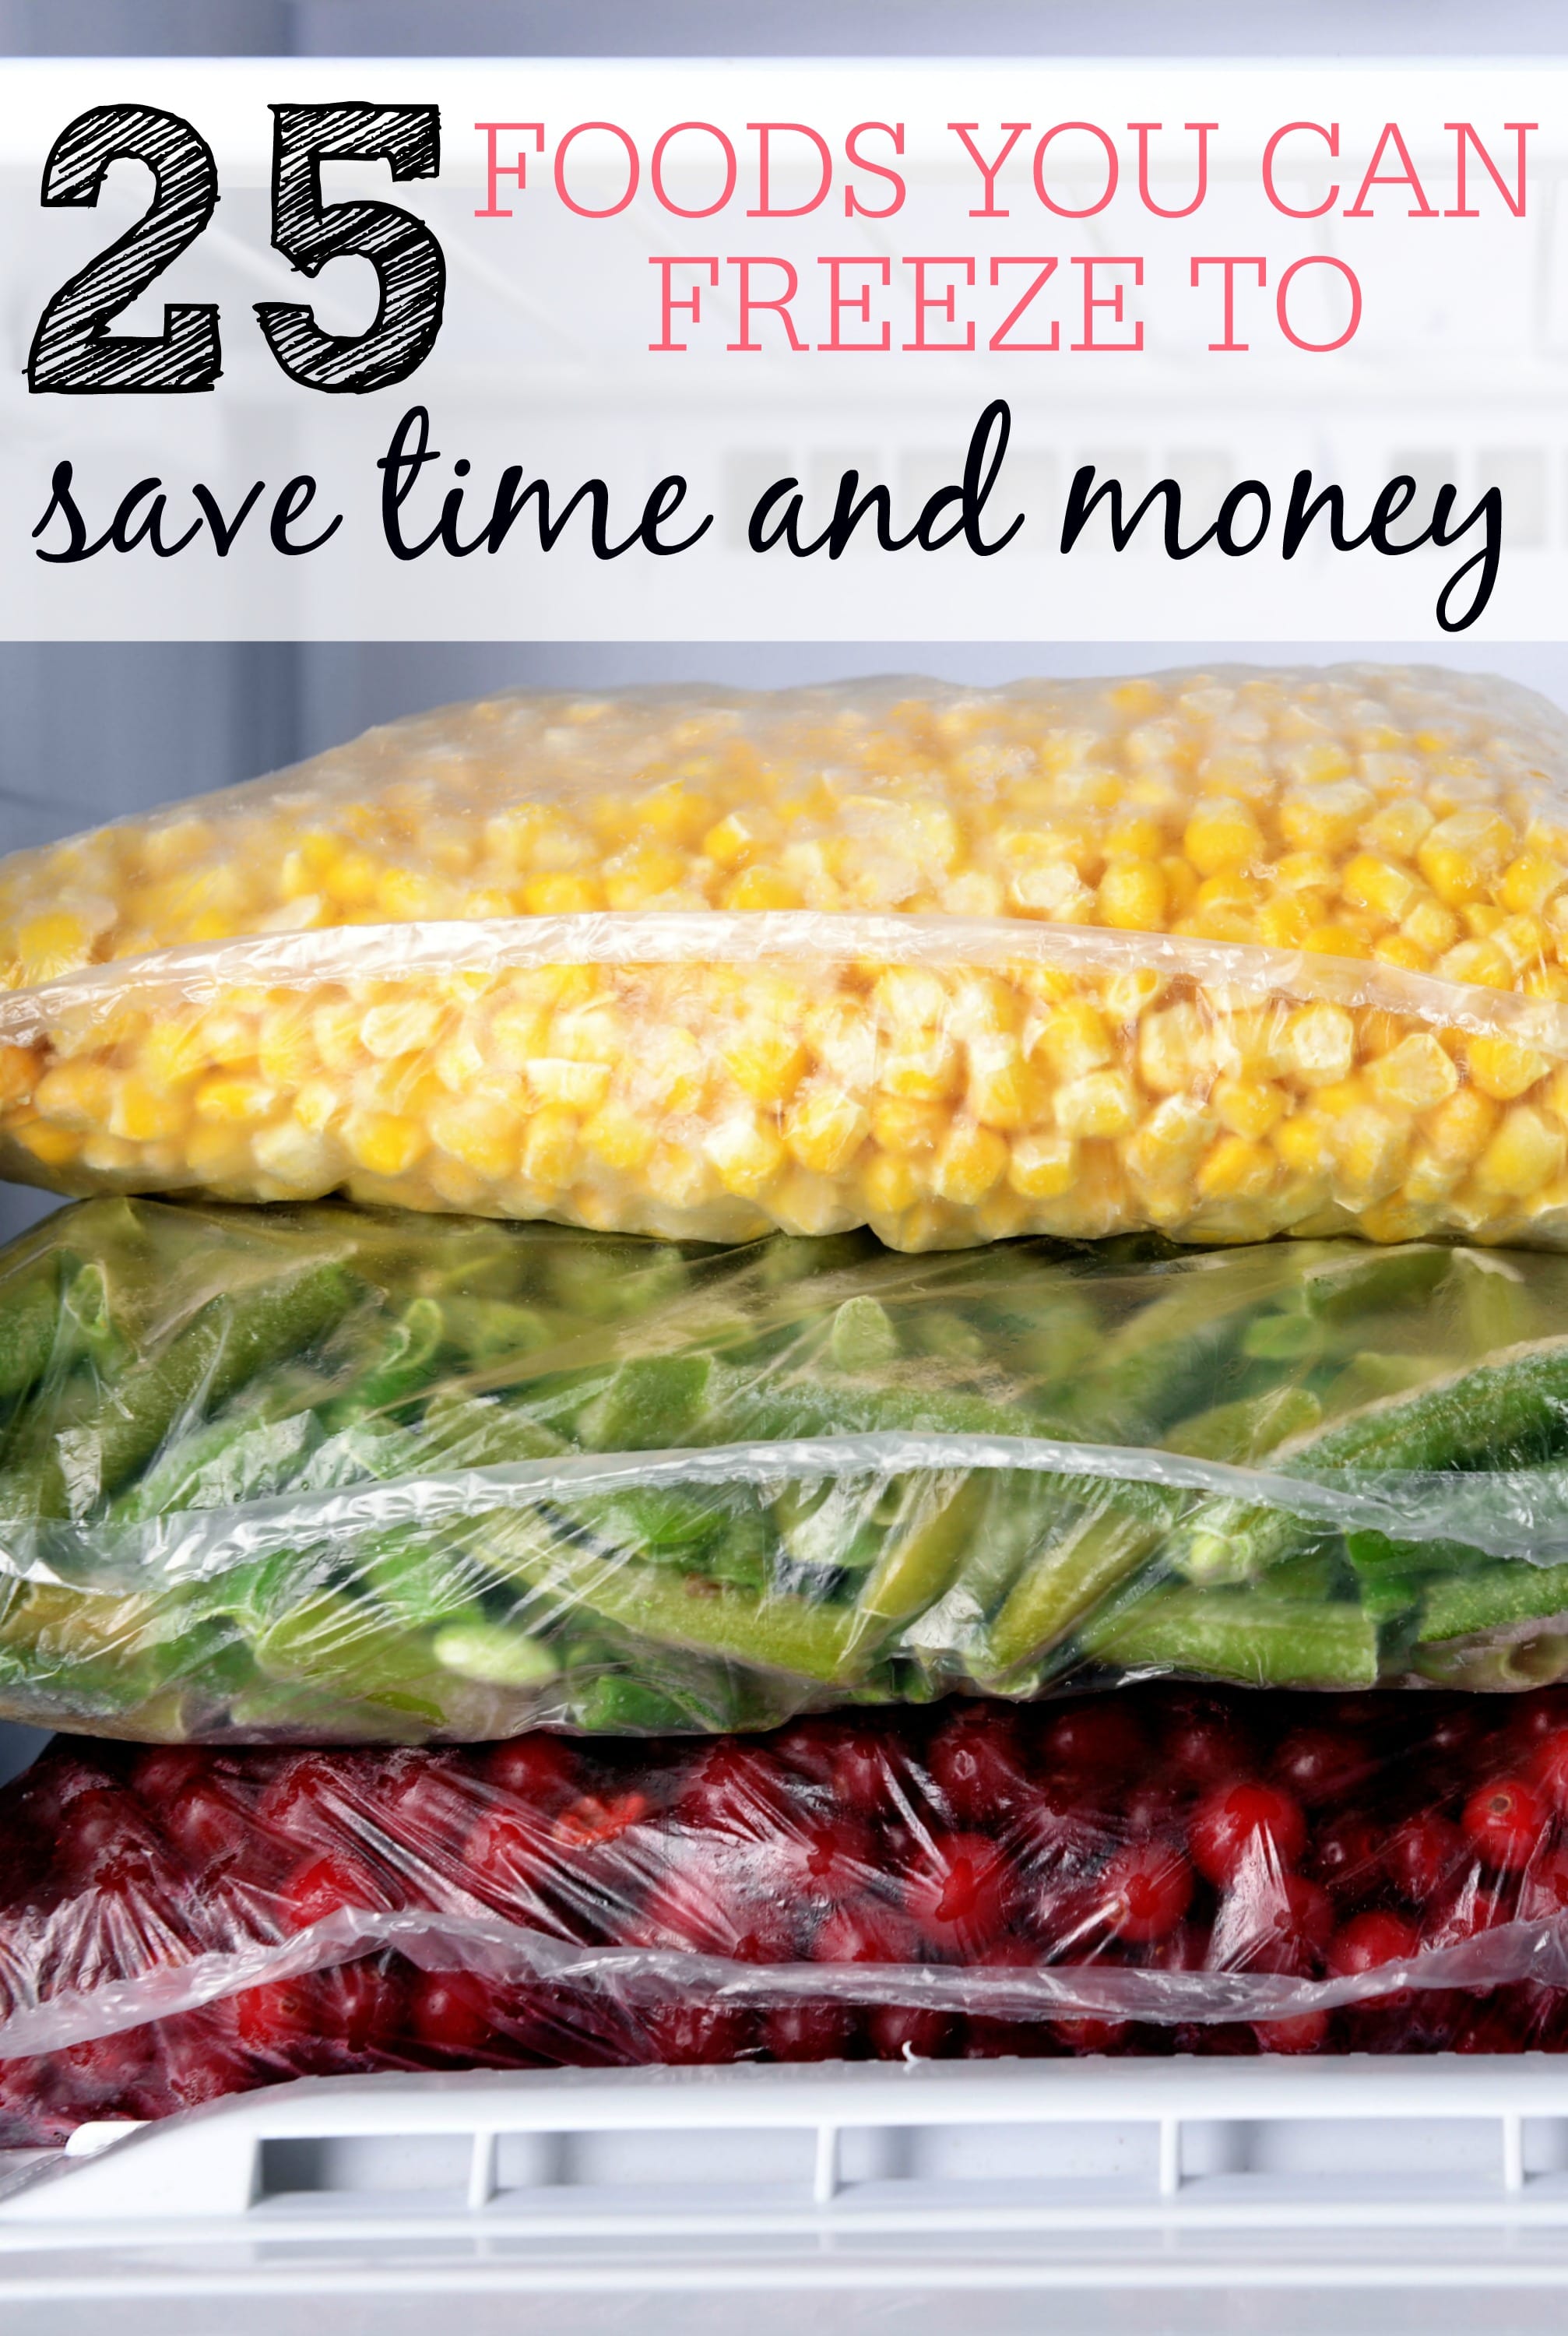 25 Foods You Can Freeze To Save Time and Money - Frugally Blonde